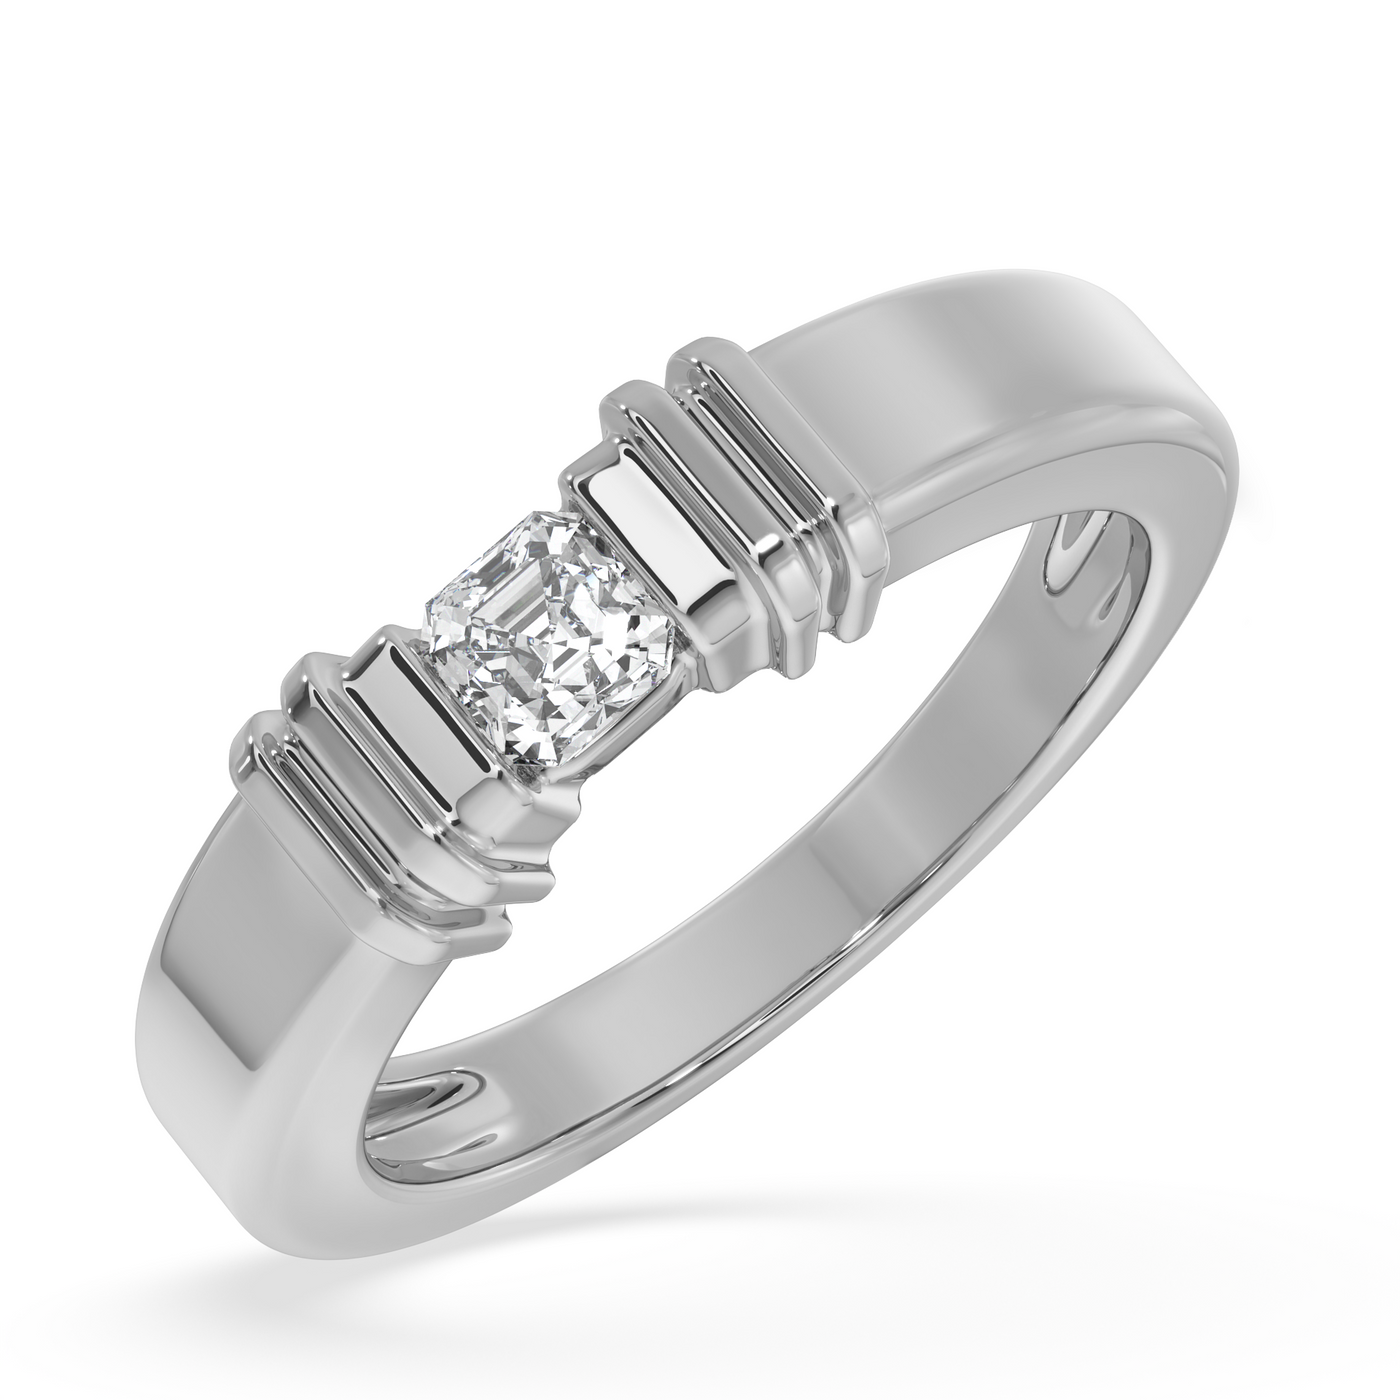 Aryash Platinum Solitaire Mens Ring-Candere by Kalyan Jewellers